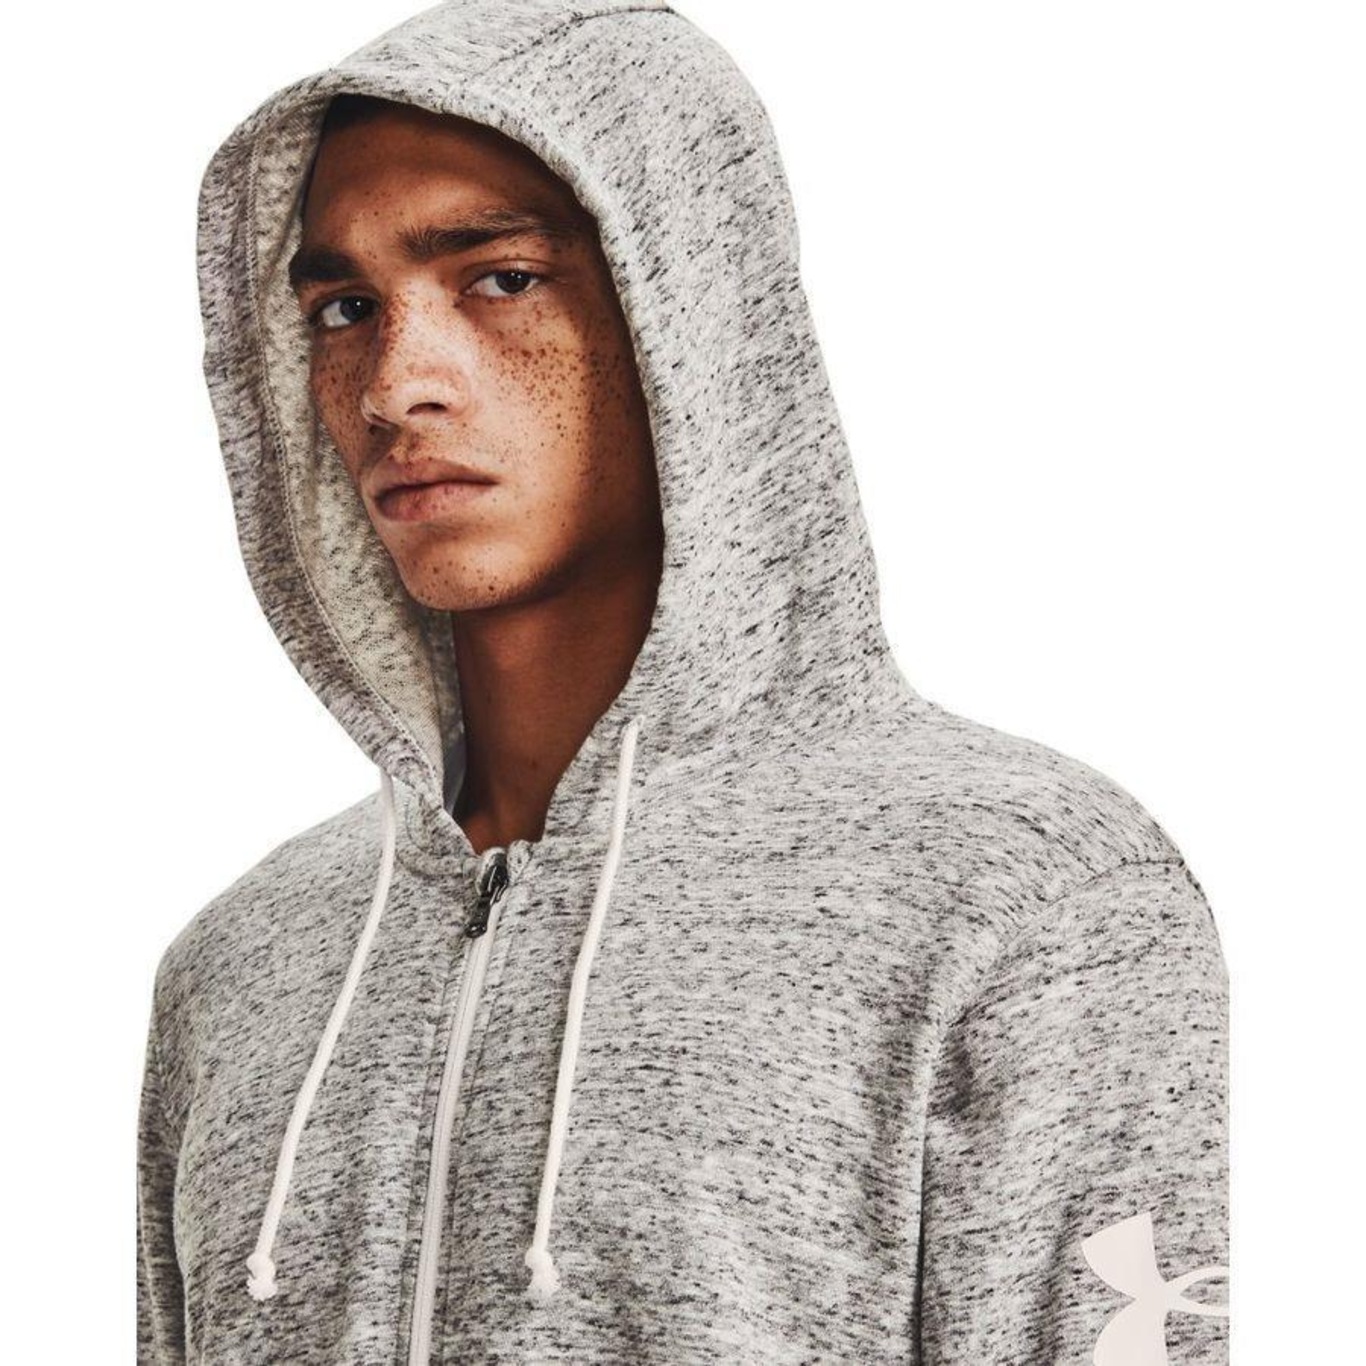 Under Armour Rival Terry Hoodie Grey